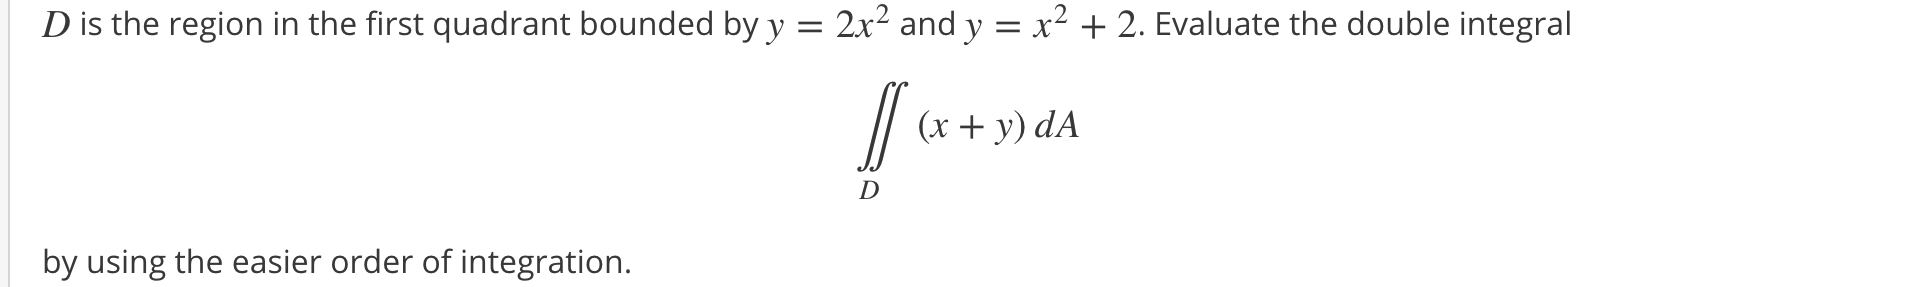 D is the region in the first quadrant bounded by y = 2x² and y = x² + 2. Evaluate the double integral
// (x + y) dA
D
by using the easier order of integration.
